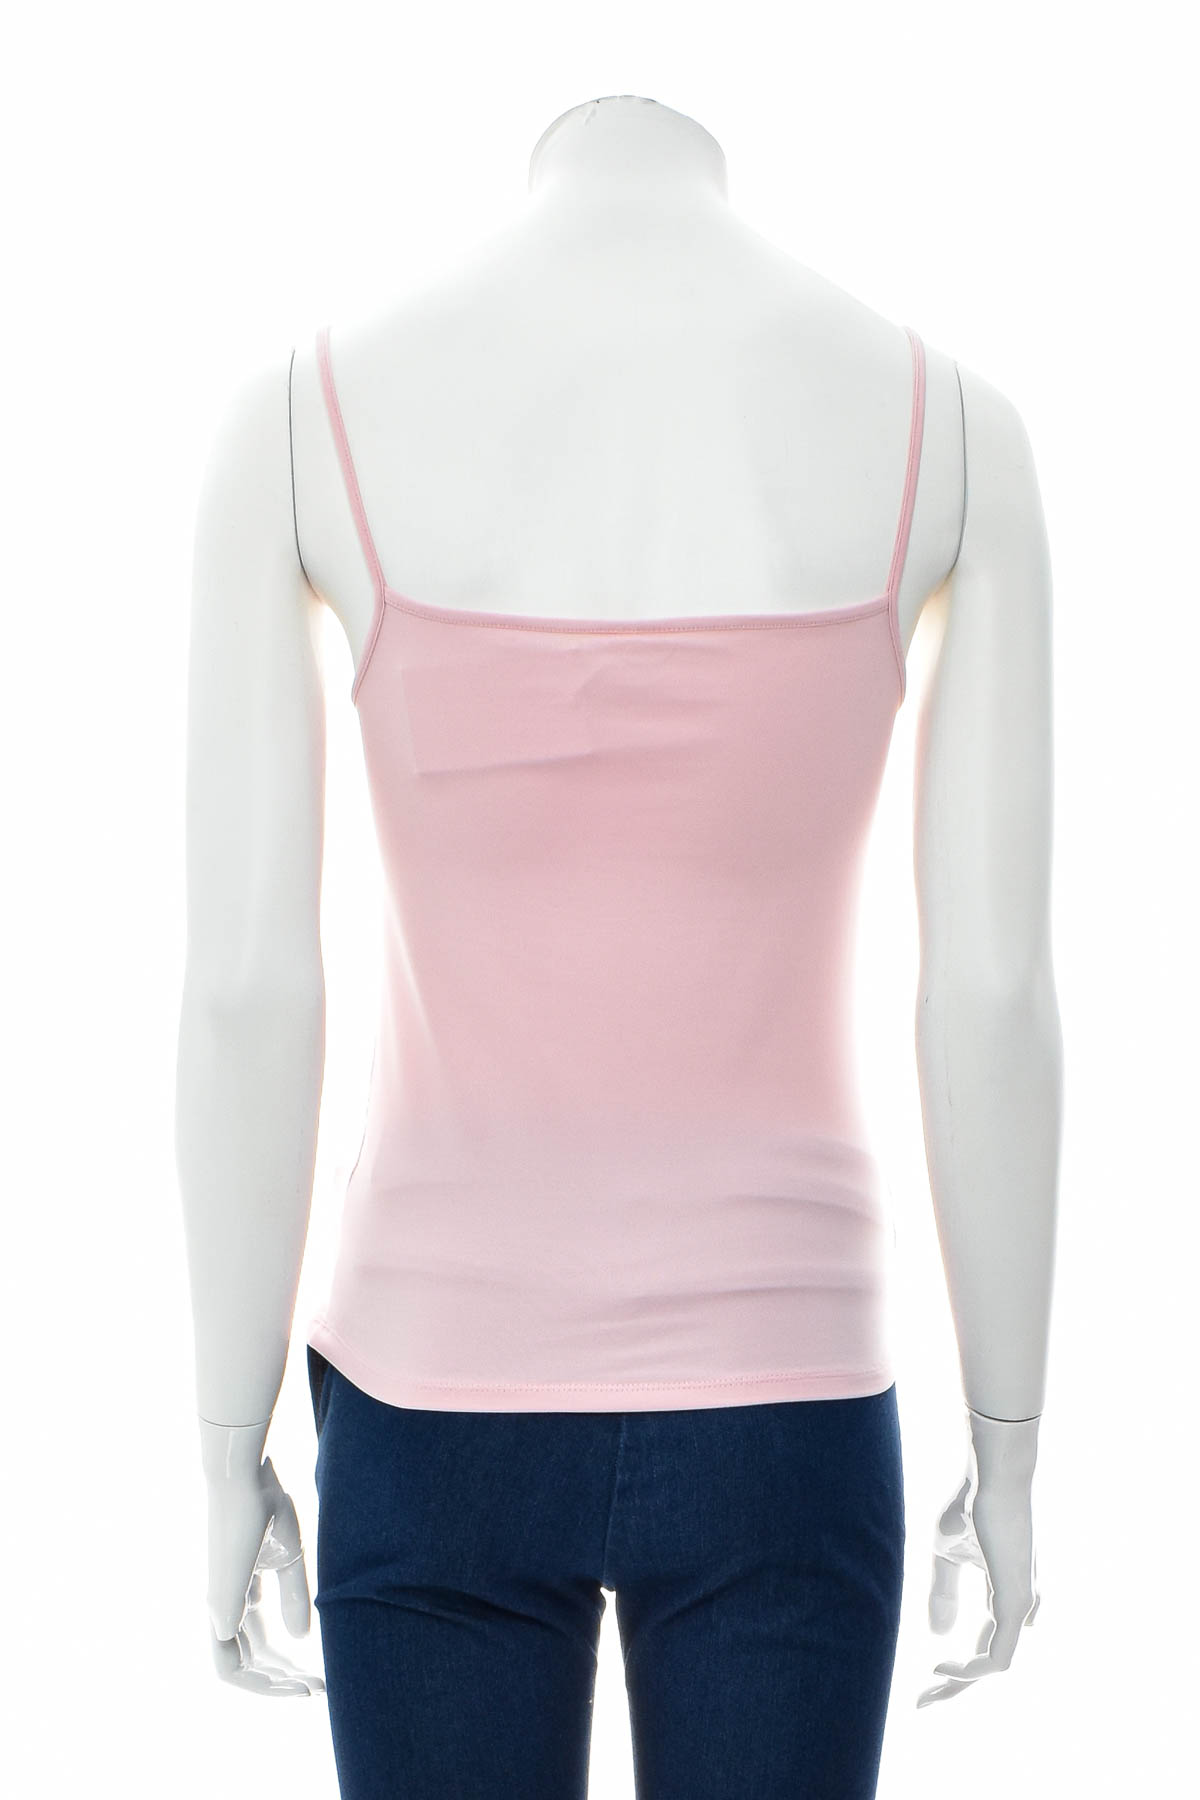 Women's top - Courtly - 1